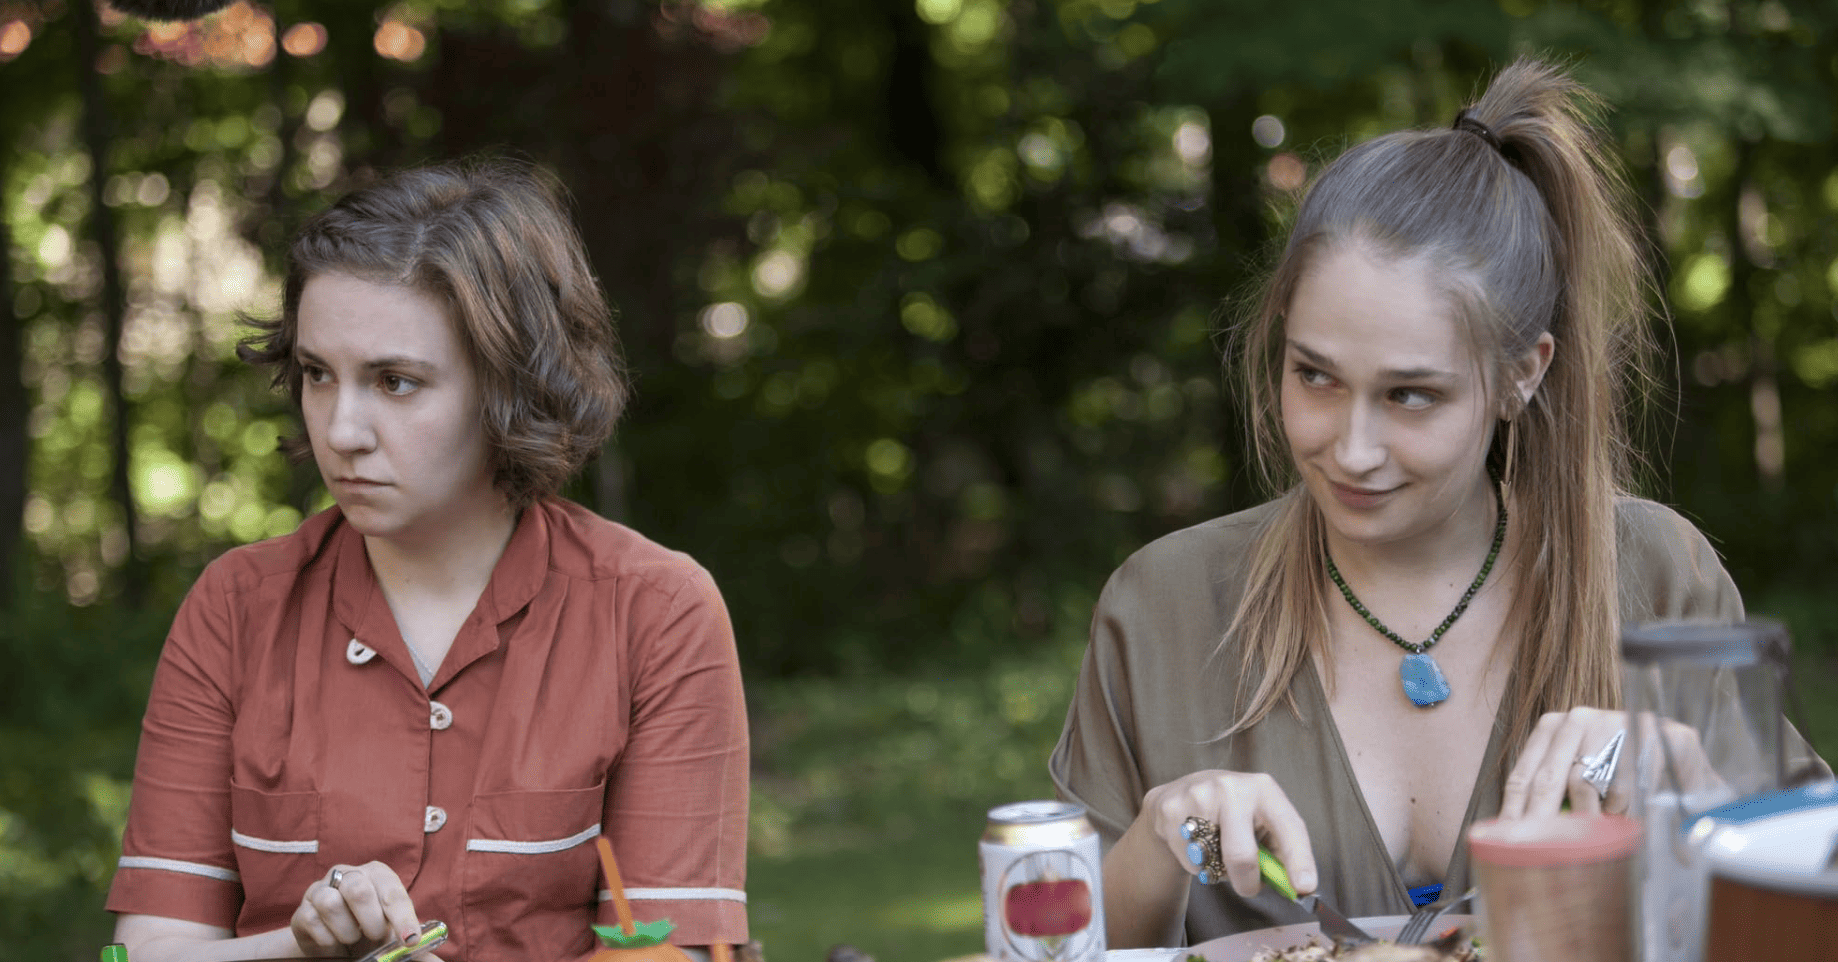 Jessa coyly looks off-camera while sitting at an outdoor dinner table next to Hannah eating rabbit in this image from Apatow Productions.